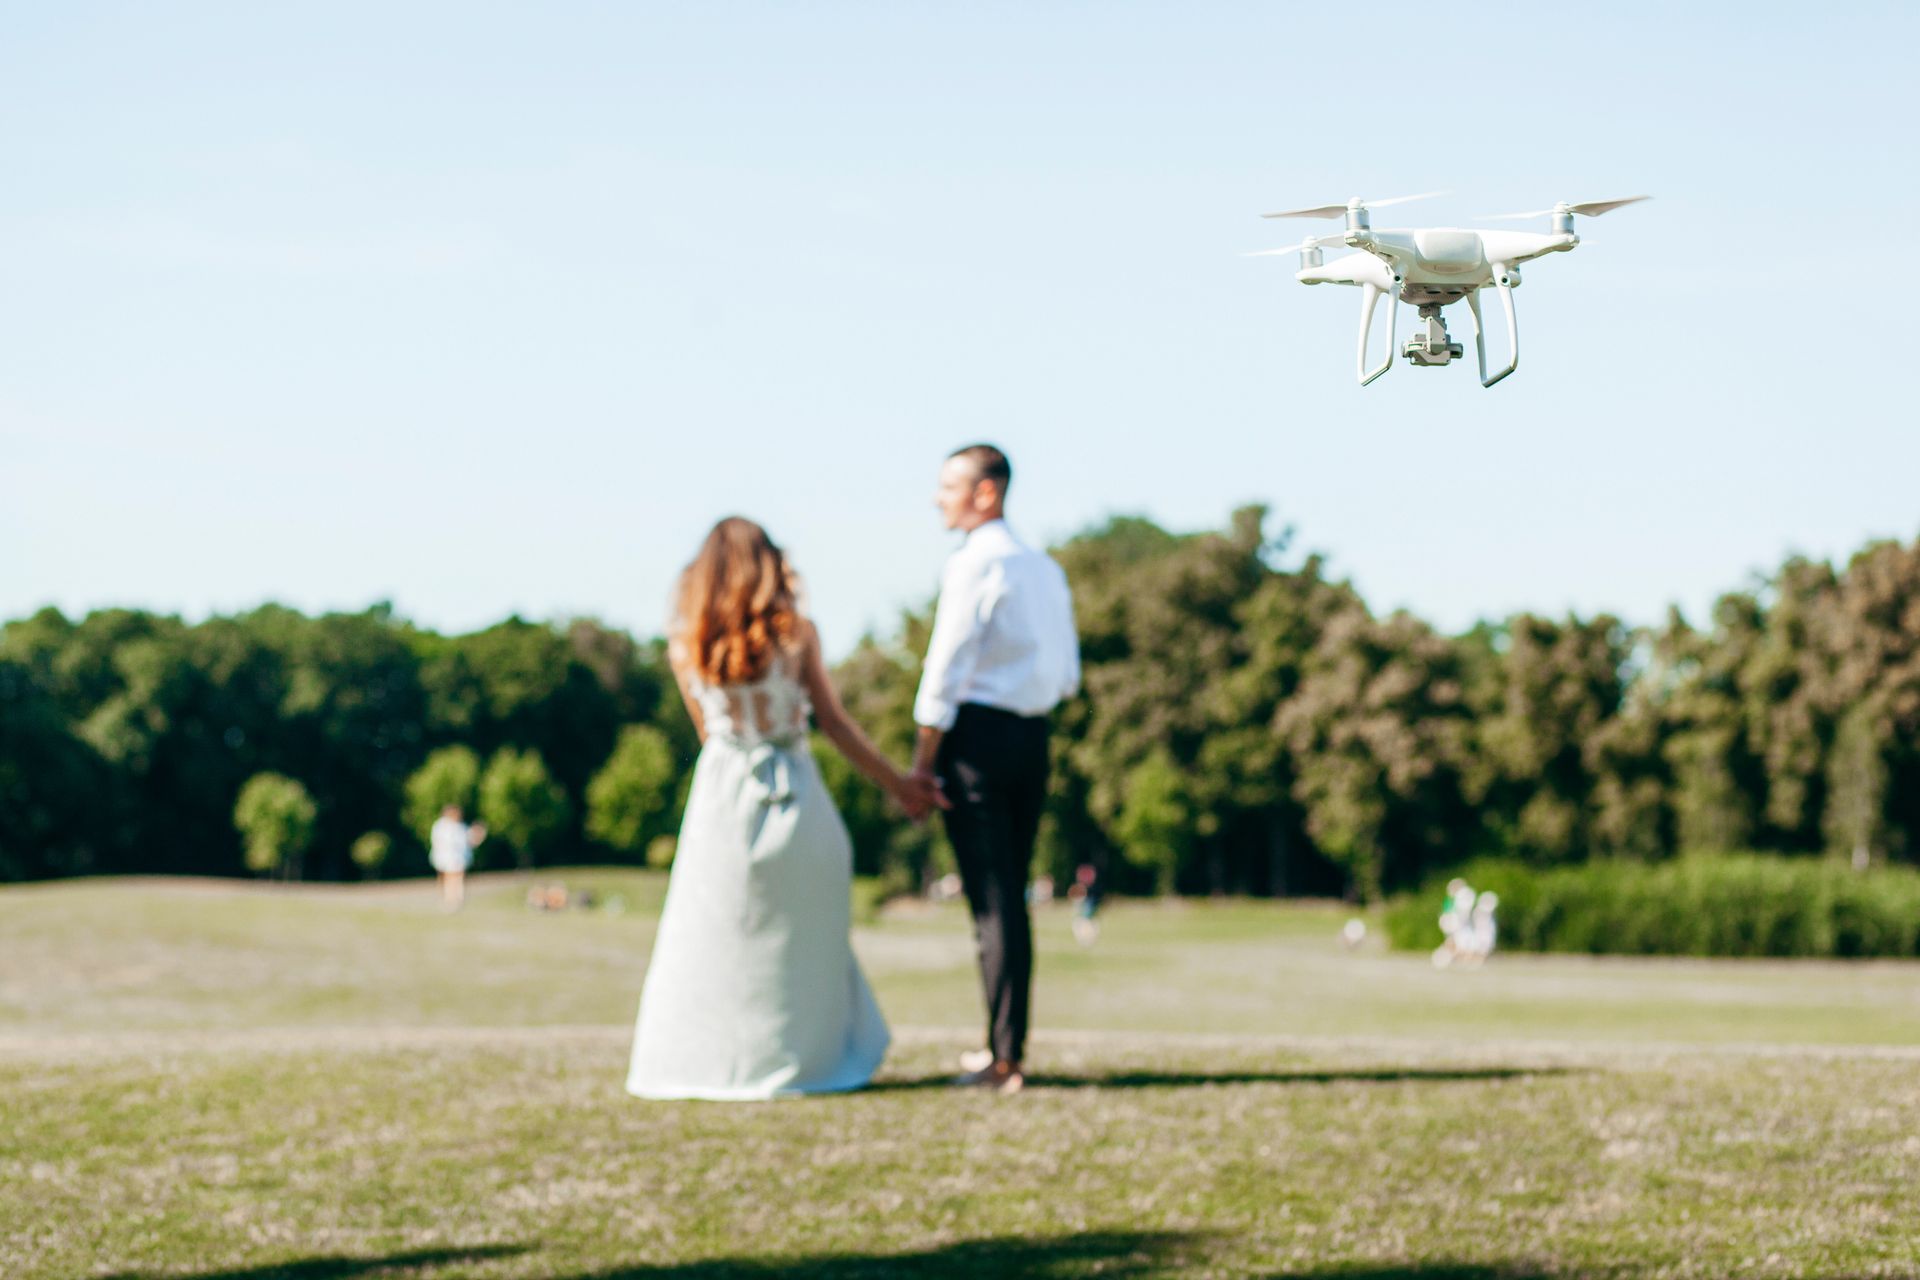 Picture of a drone engaging in wedding photography by Affordable Drone Photography Modesto in California.